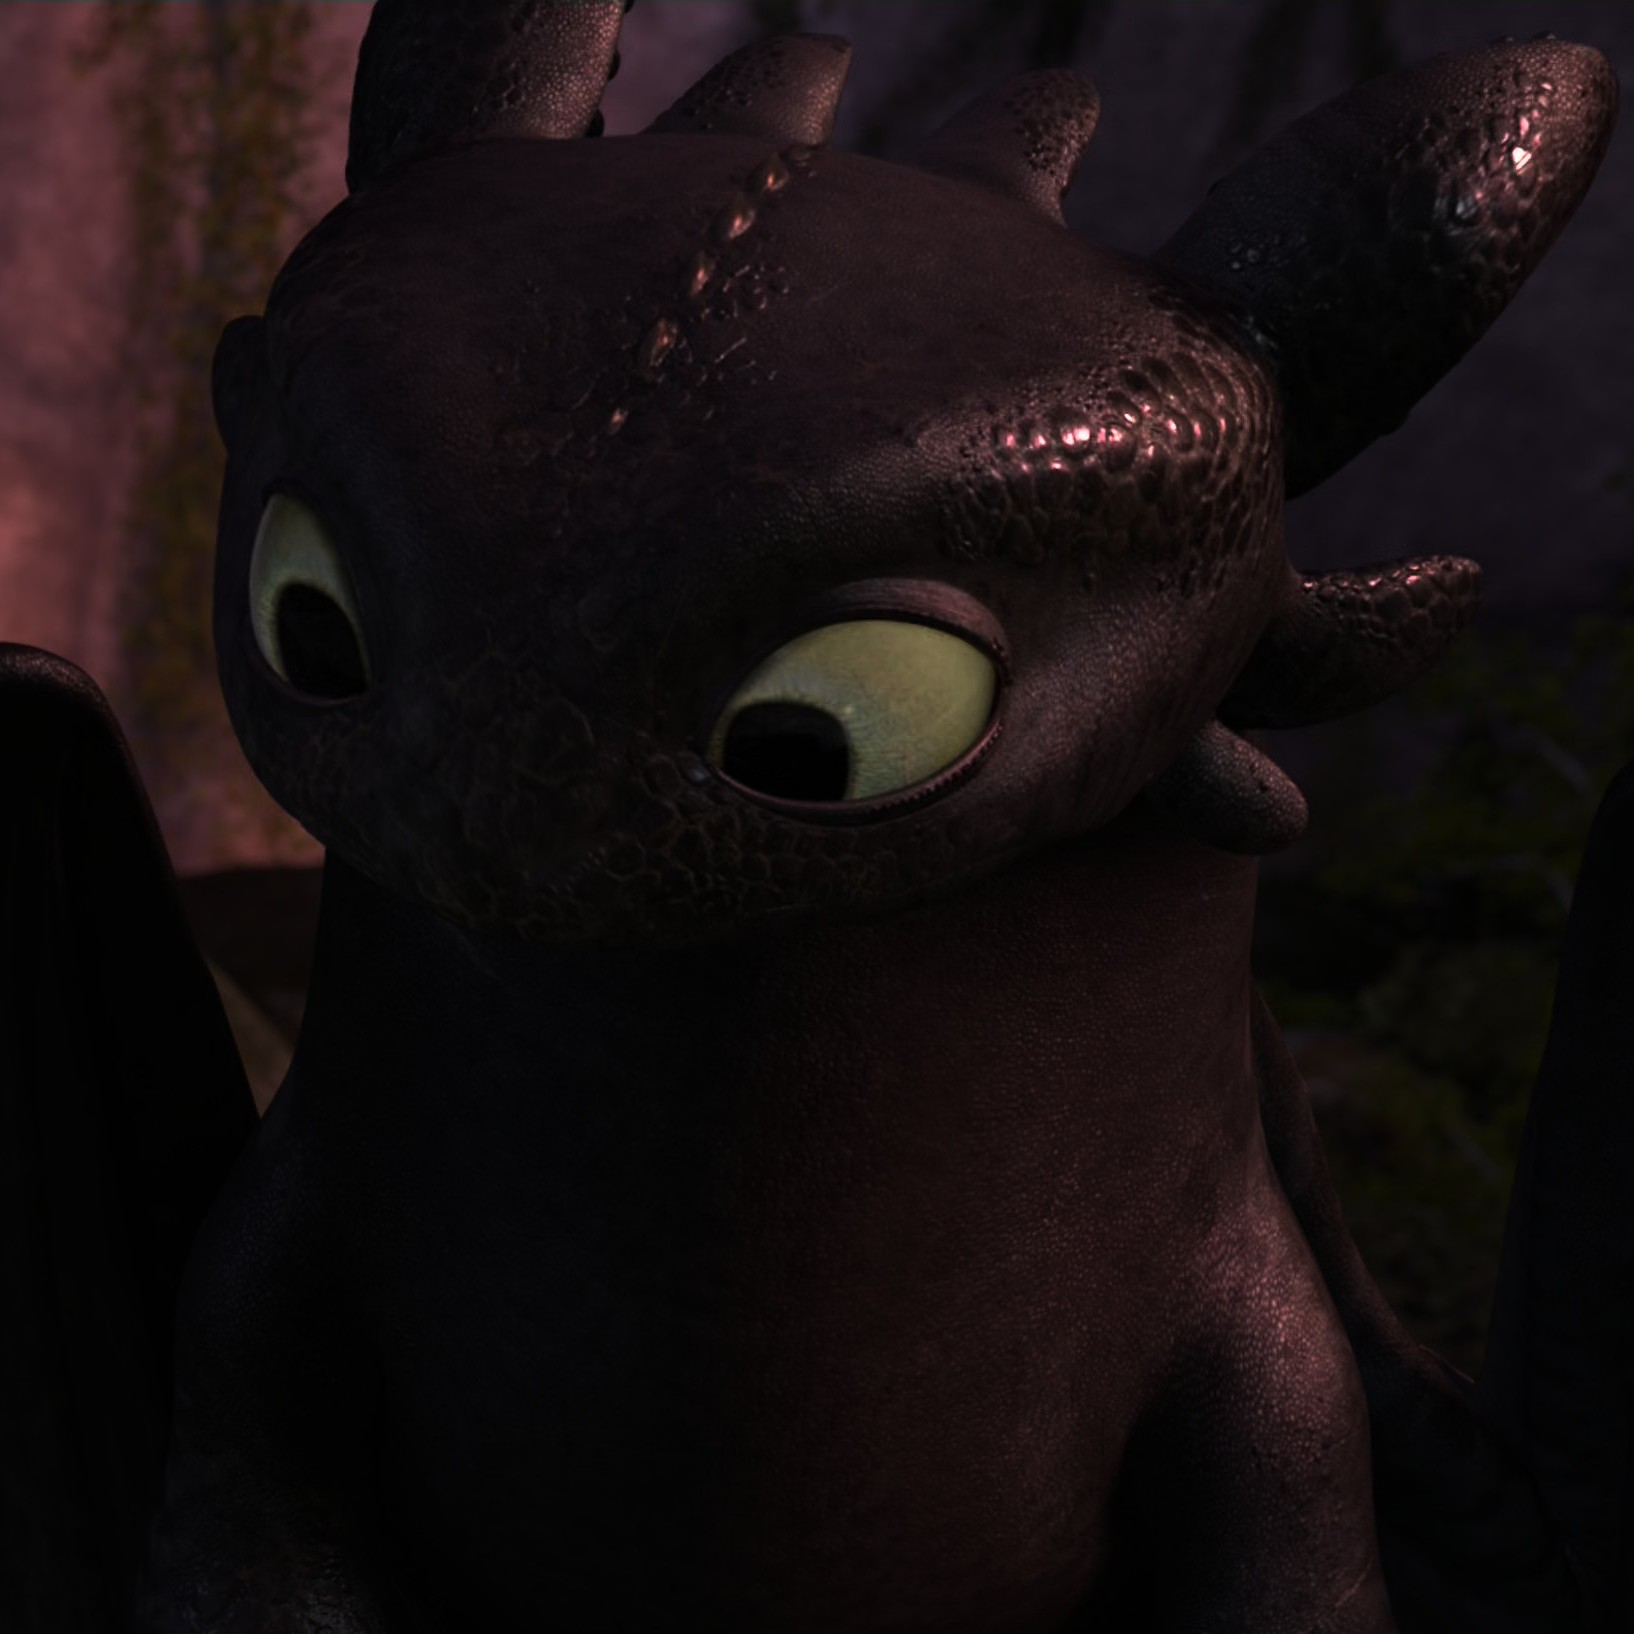 Toothless pic n°39